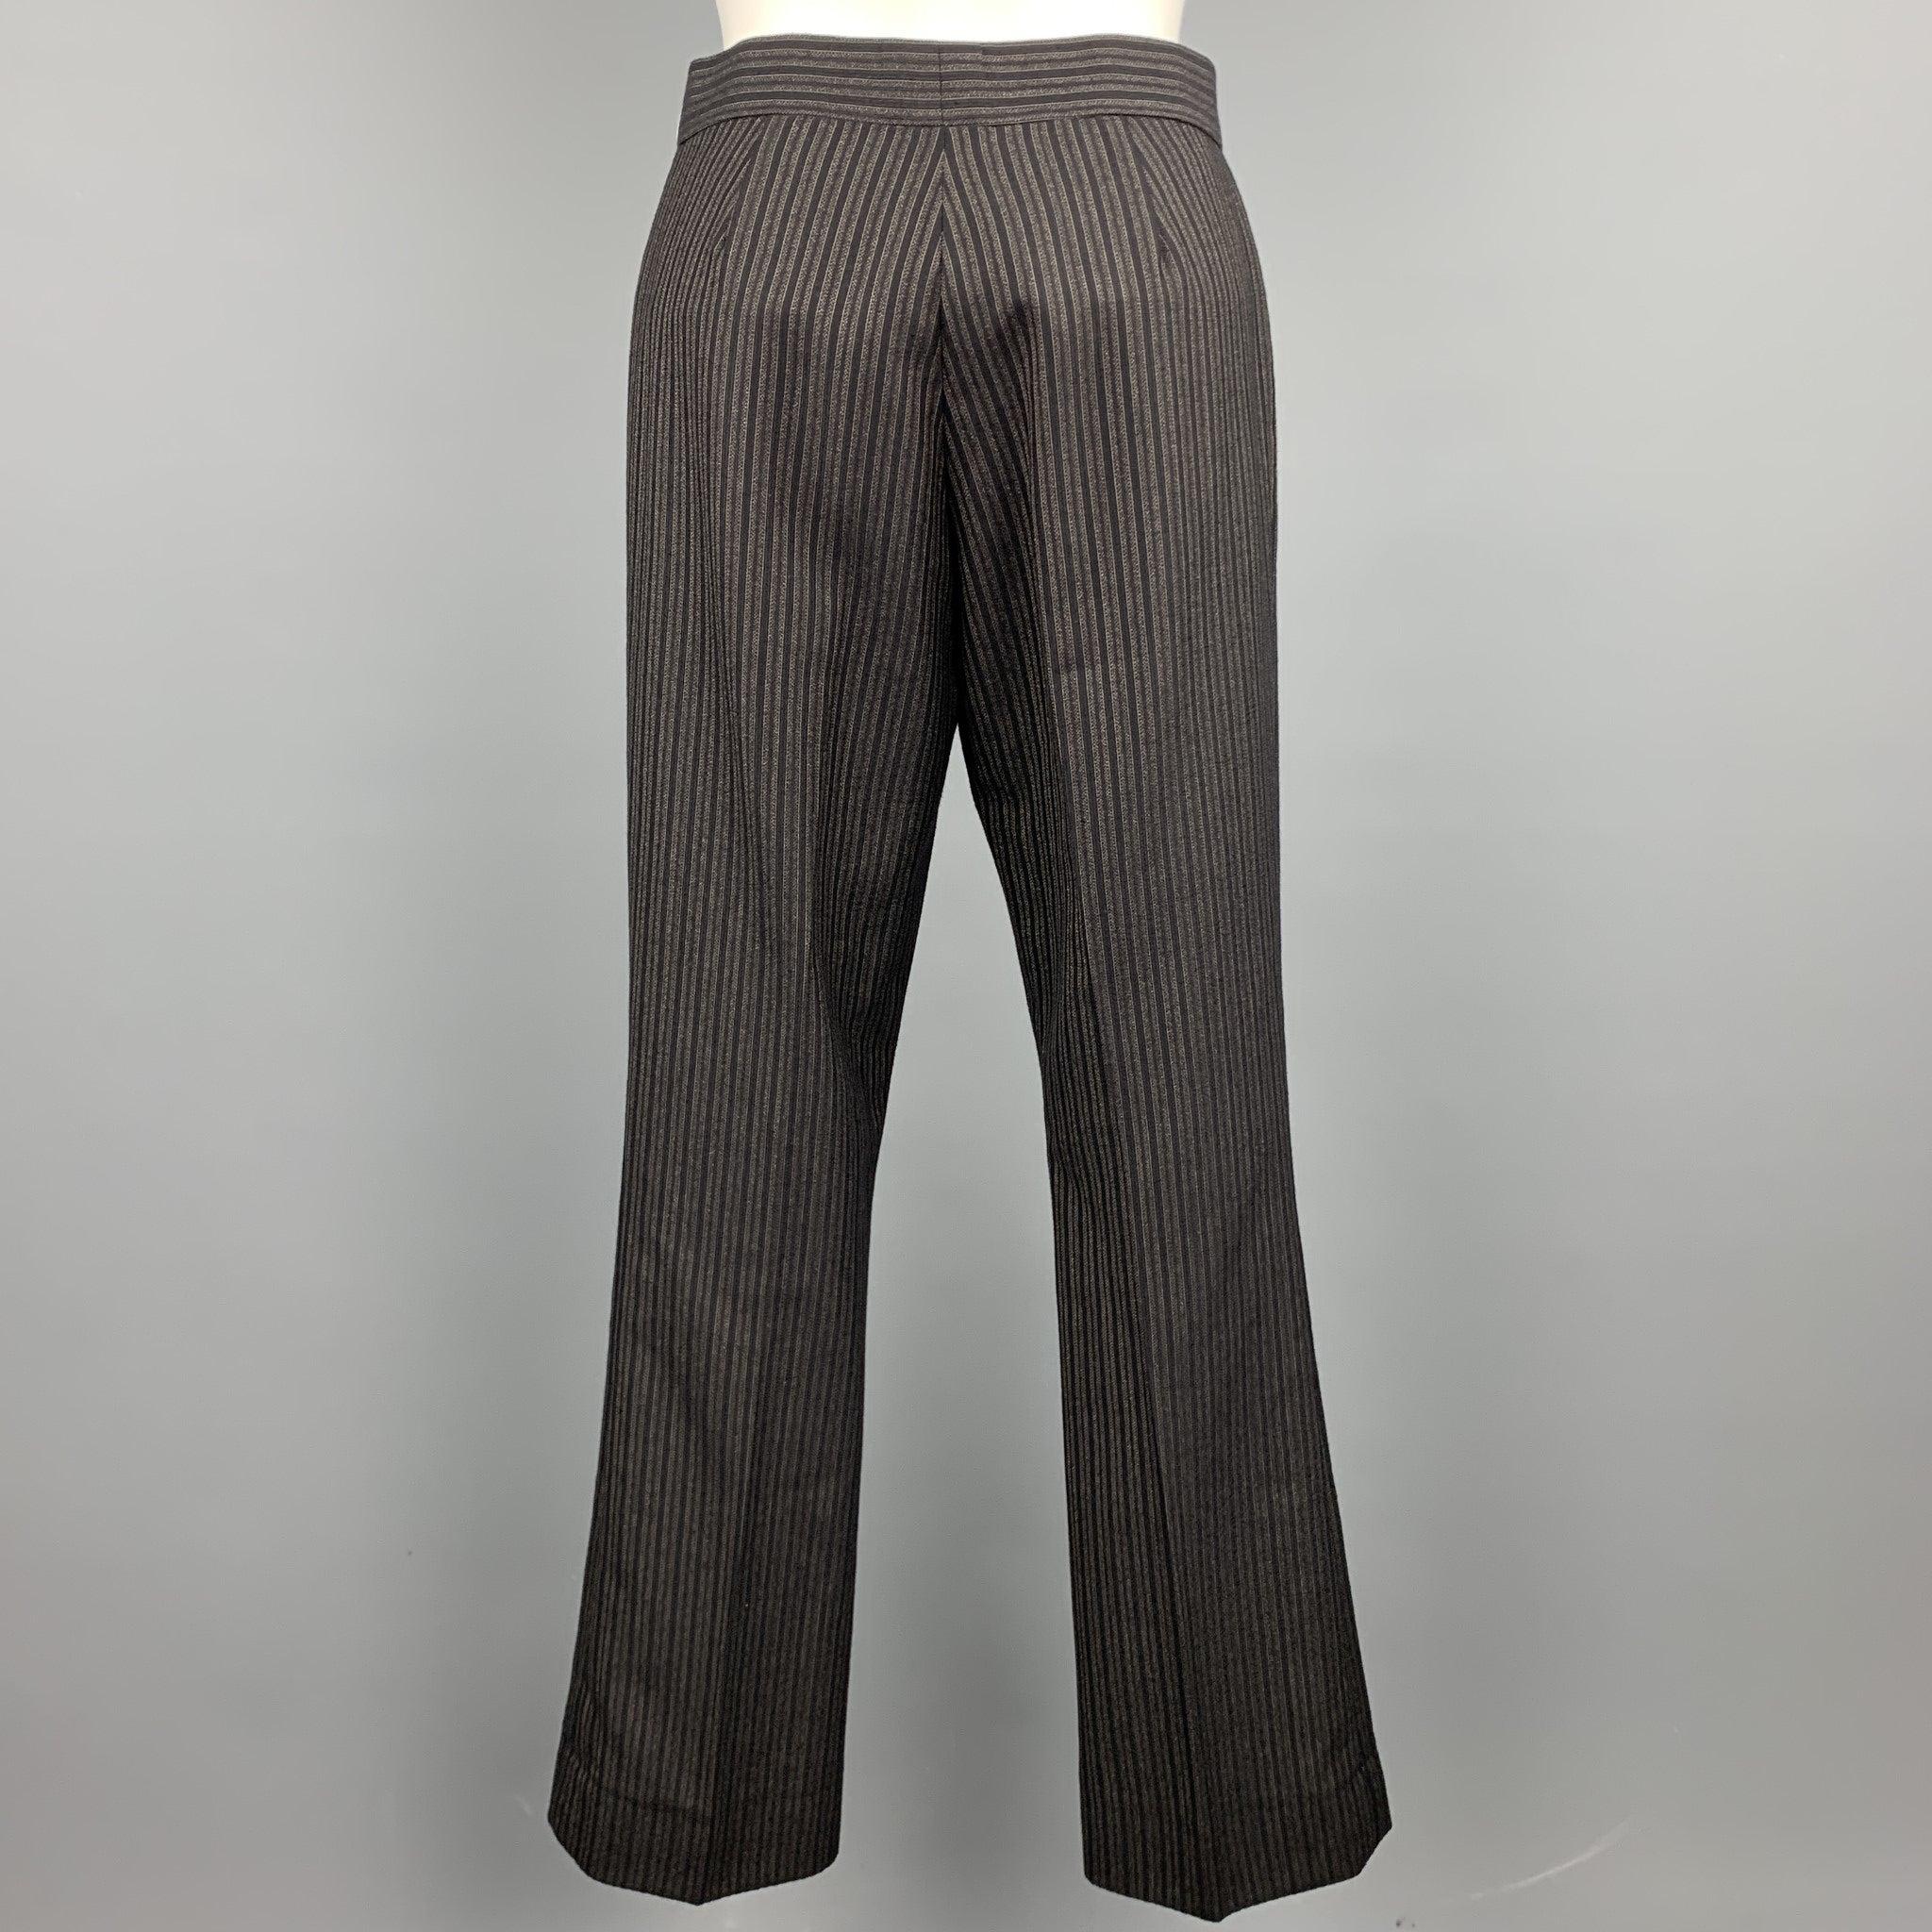 RALPH LAUREN COLLECTION Size 2 Black & Grey Striped Wool Dress Pants In Good Condition For Sale In San Francisco, CA